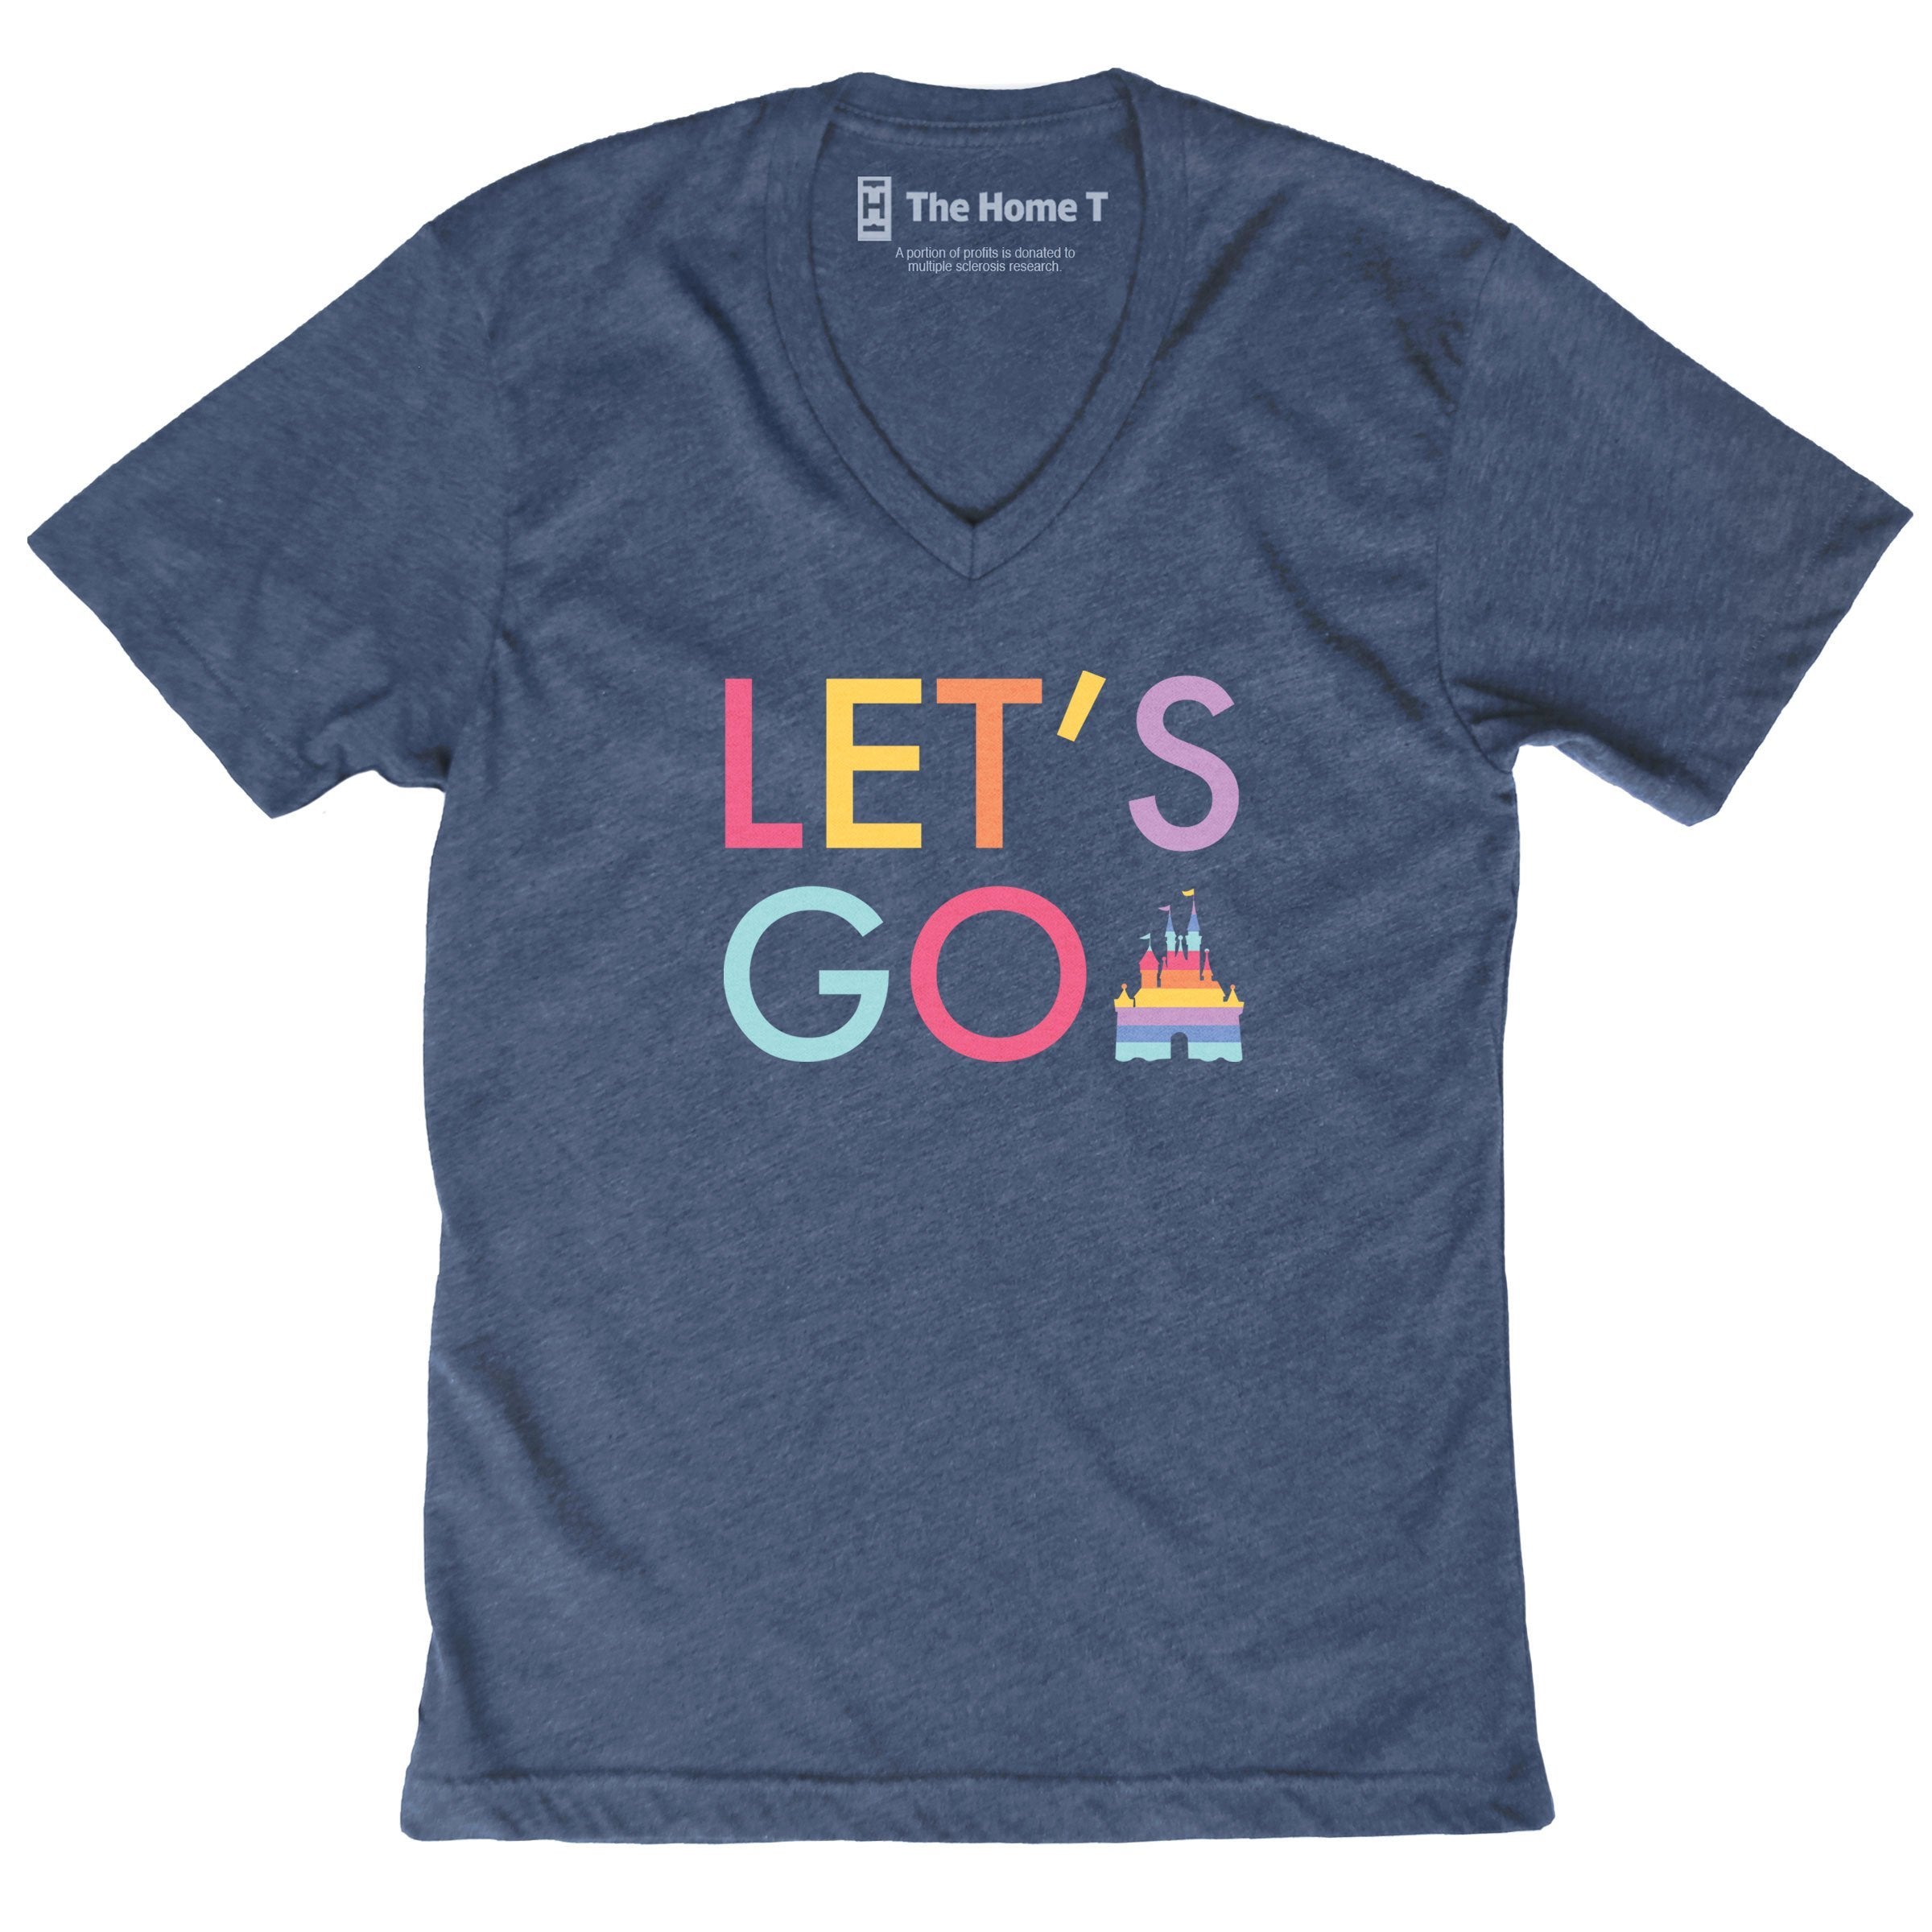 Let's GO The Home T XS V-NECK